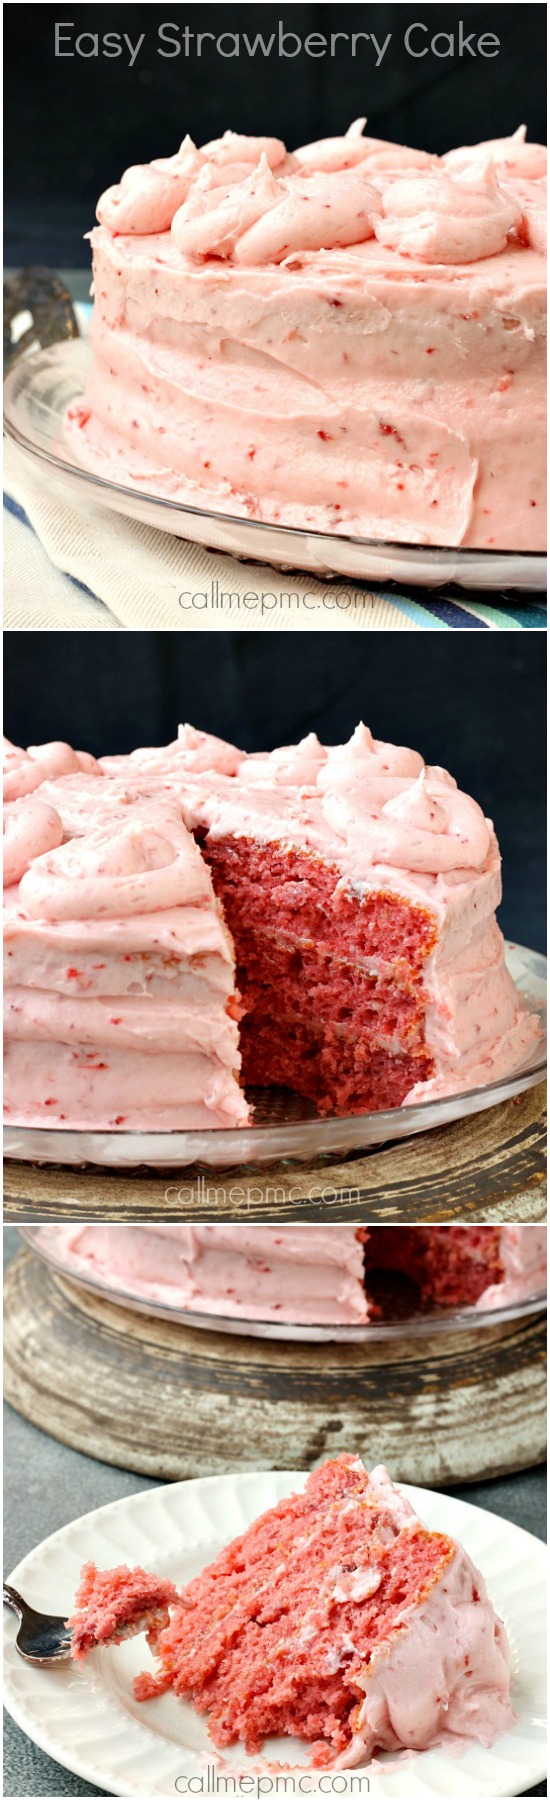 Easy Strawberry Cake tastes and looks like a bakery cake, but is easier than from-scratch! It's full of strawberries in the cake and the icing. This cake is 'easy' because it starts with a cake mix, but don't worry unless you tell no one will ever know, it tastes like homemade.